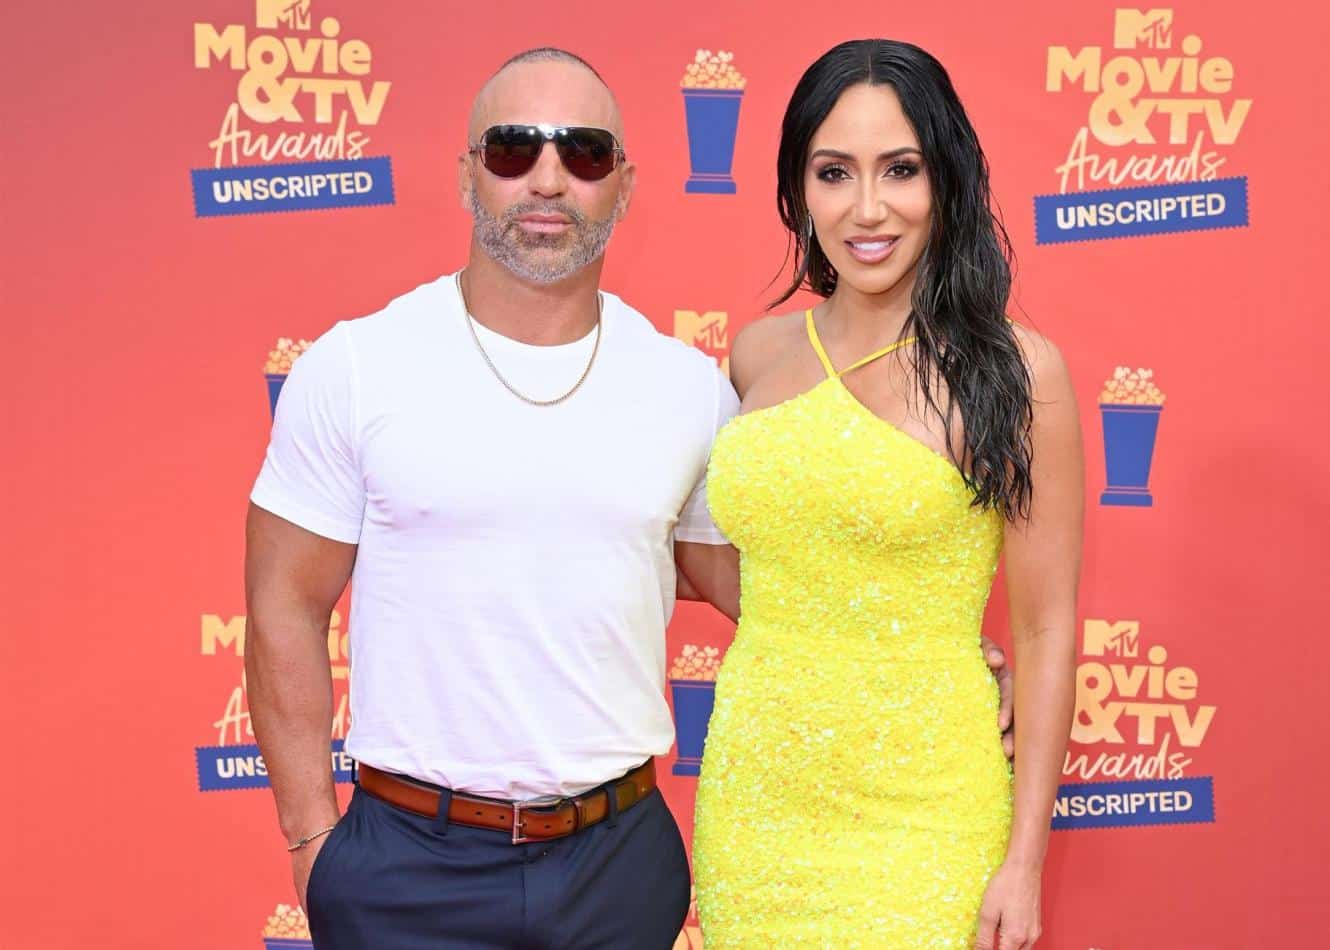 Melissa Gorga Talks She and Joe’s Future on RHONJ, Says She’s "Over" Teresa’s “Toxic” Antics, and Reveals Joe “Couldn’t Even Bring Himself” to Events” While Filming Season 13 Amid Feud